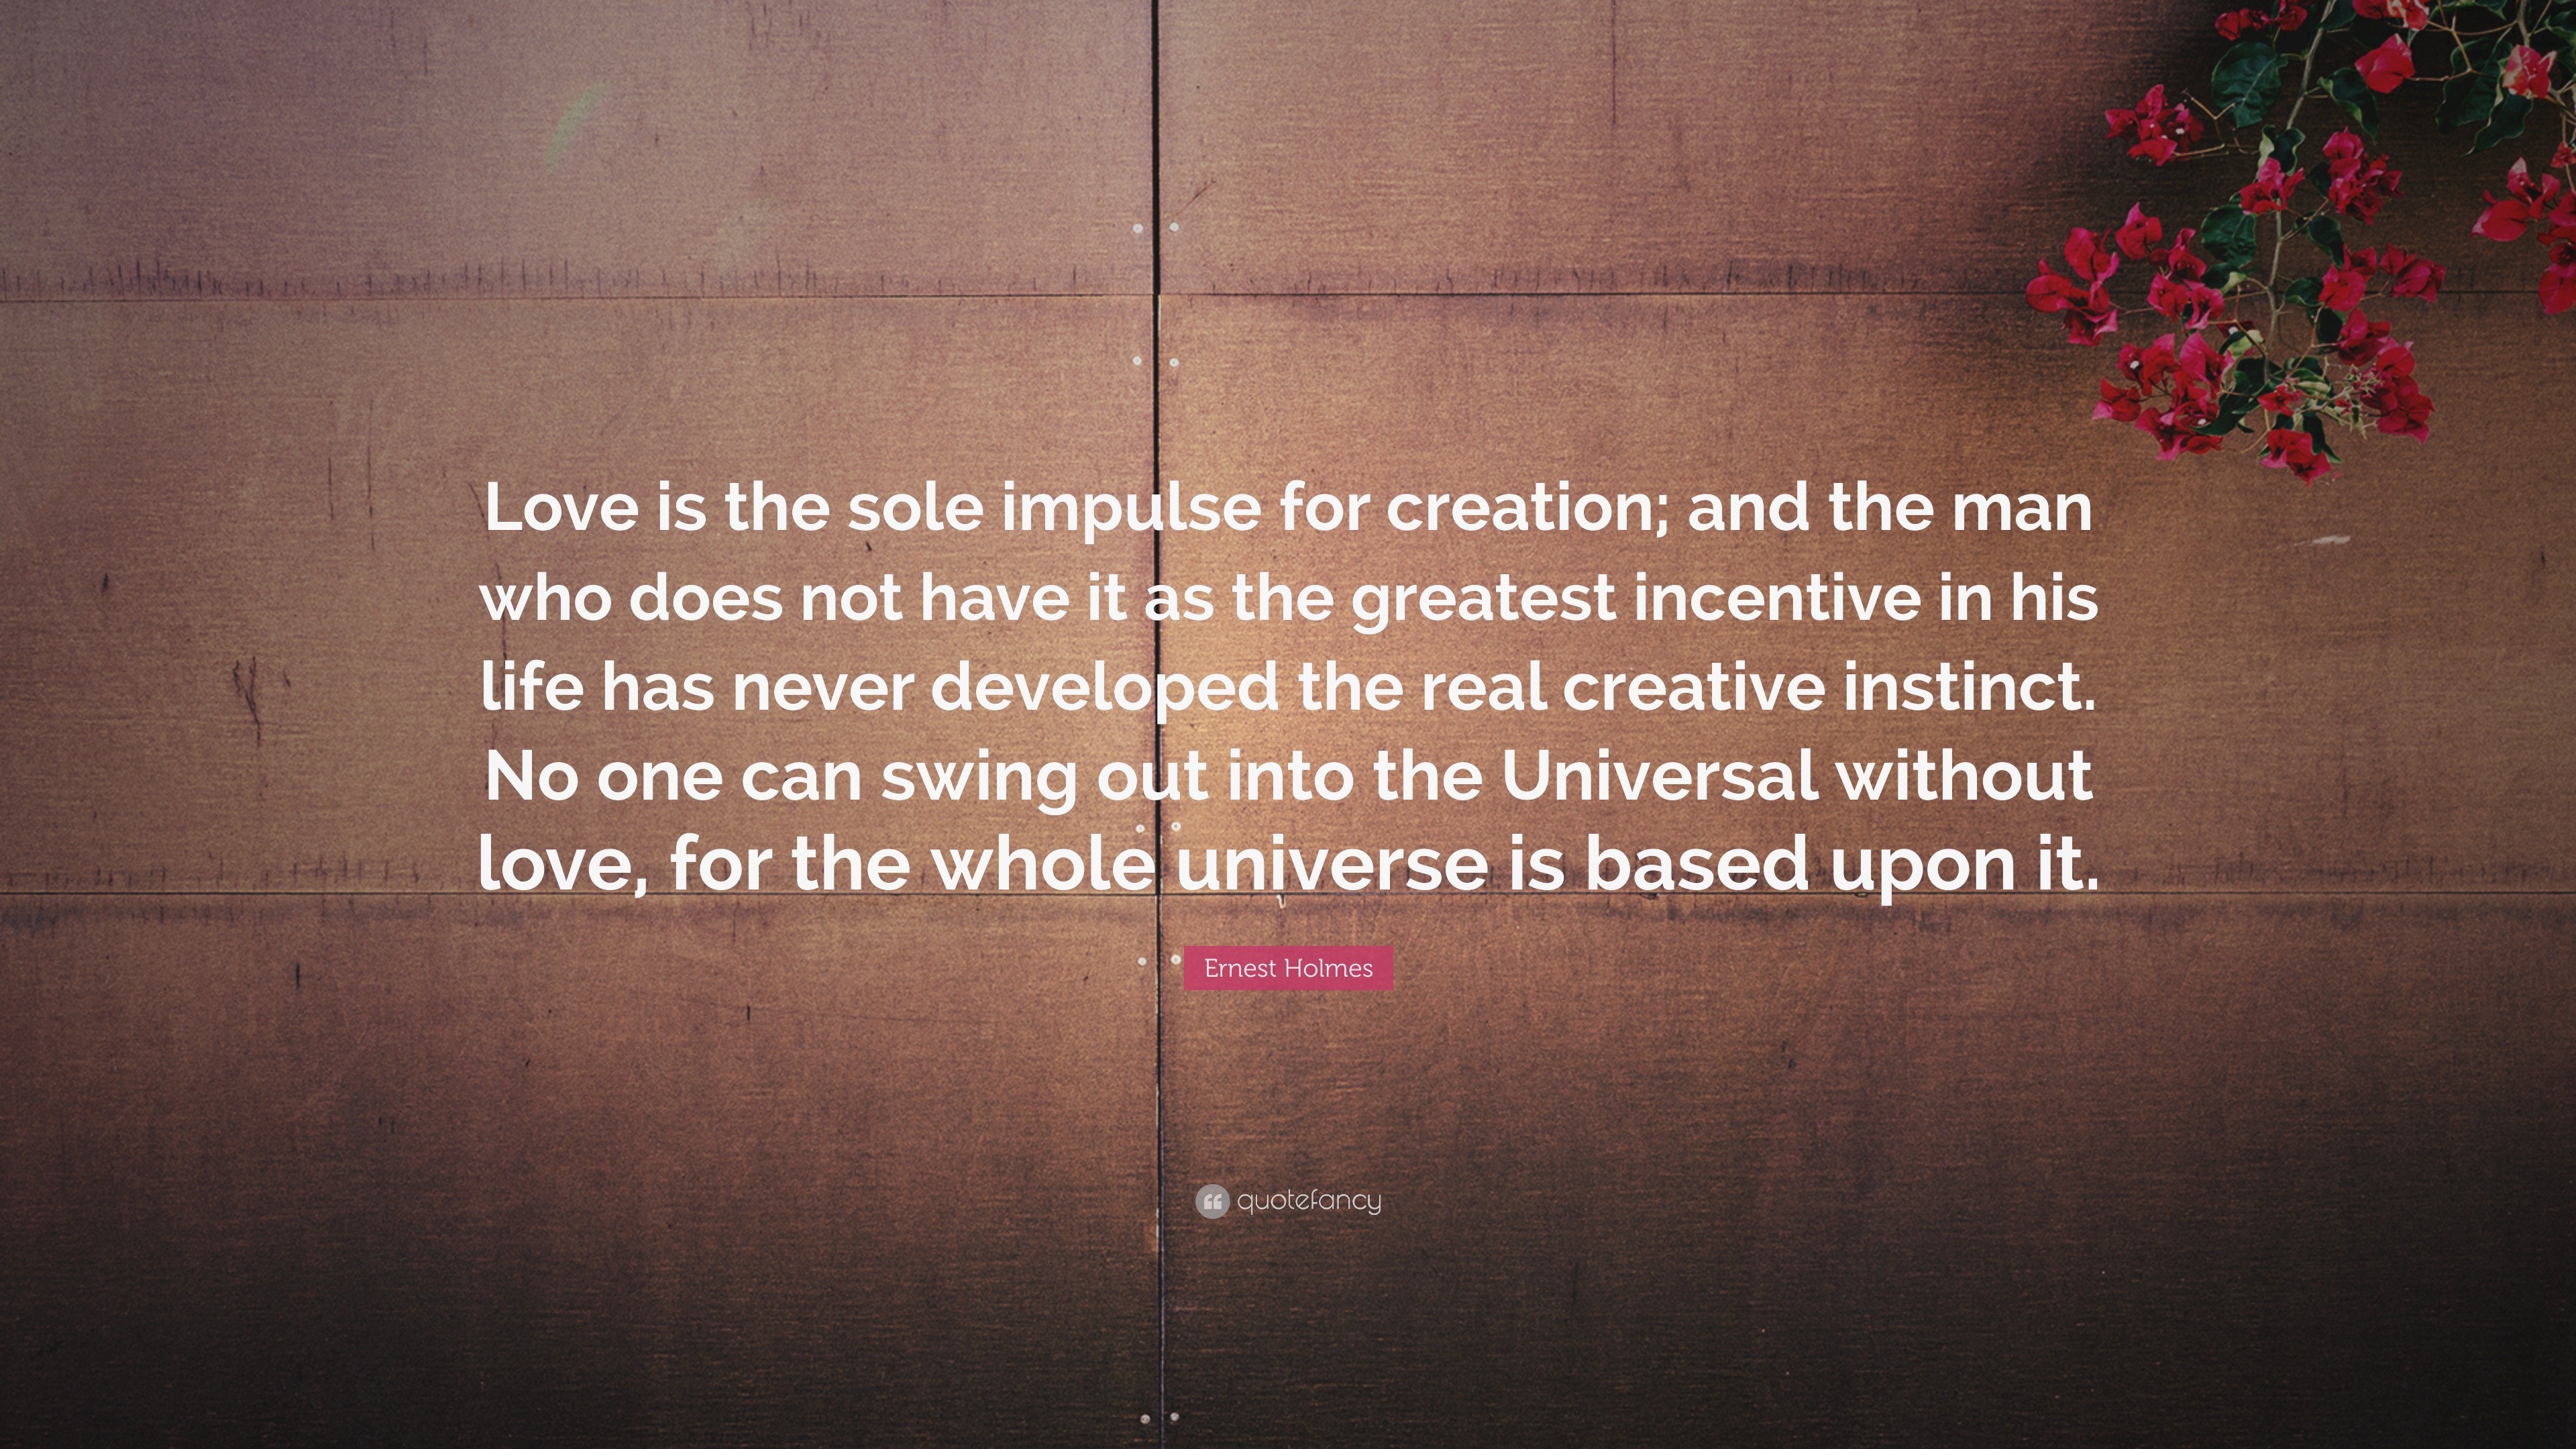 Ernest Holmes Quote “Love is the sole impulse for creation and the man